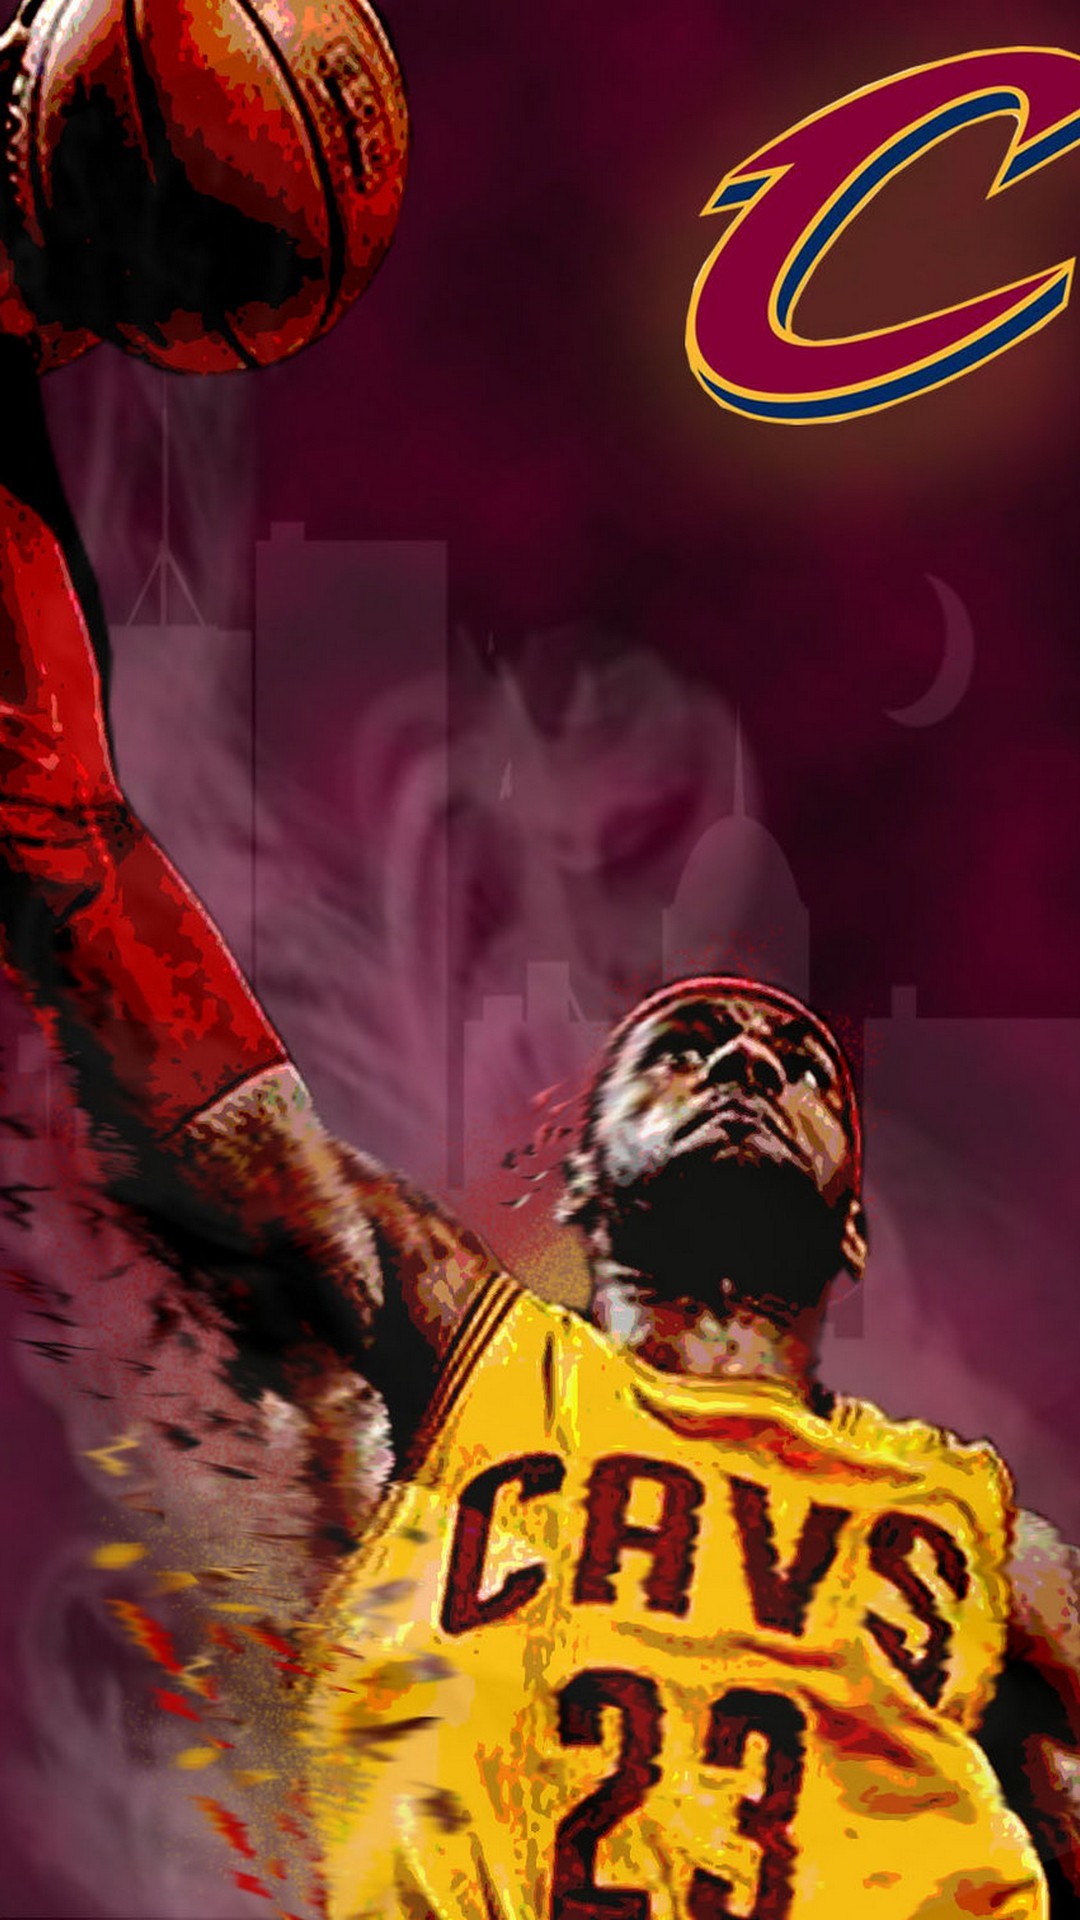 I know some of you were wanting a wallpapersized version of this LeBron  dunk  rclevelandcavs